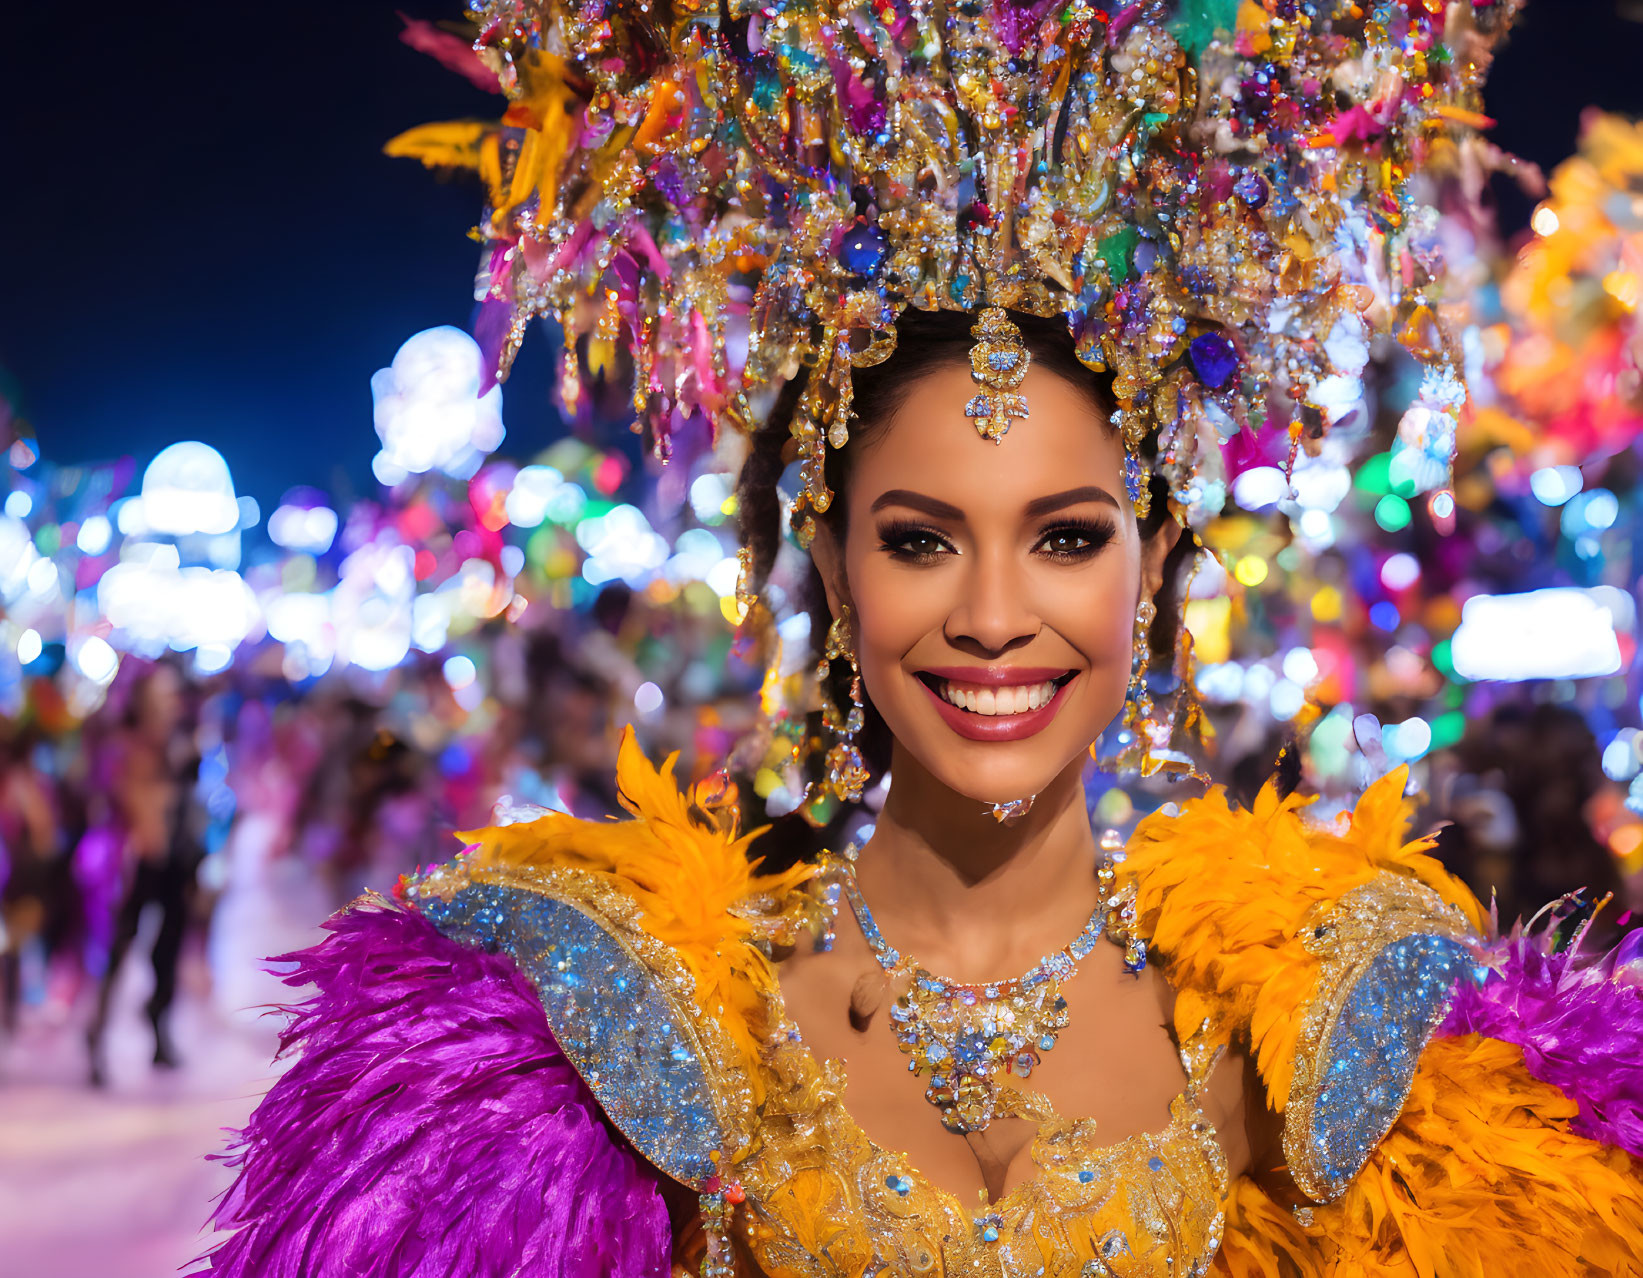 Colorful Carnival Costume with Feathered Headdress and Festive Lights Background